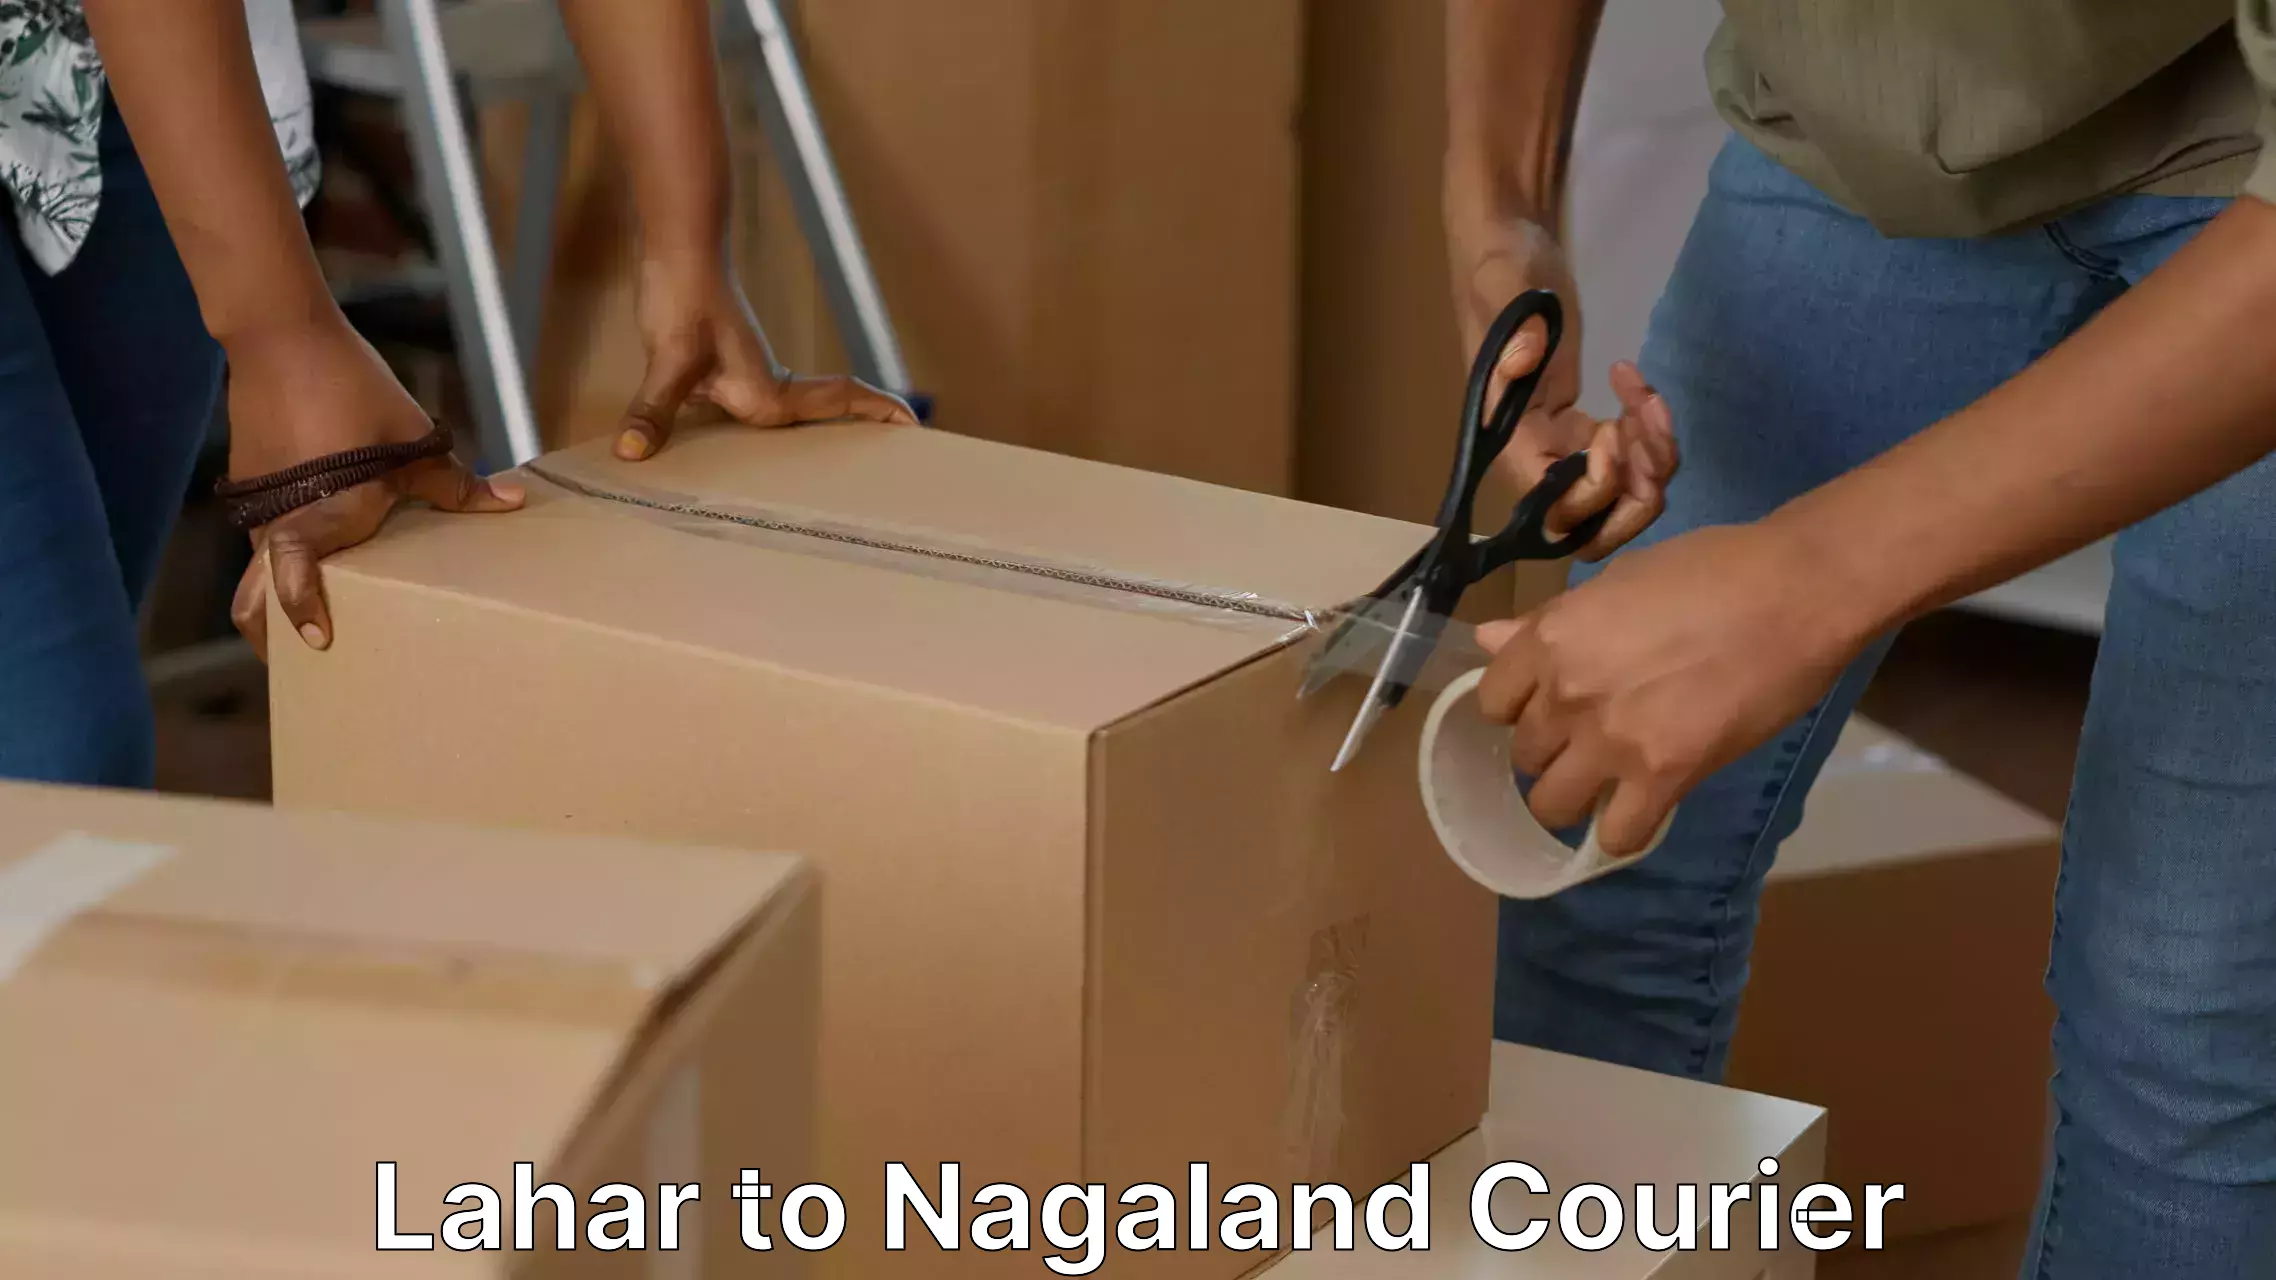 Furniture moving assistance Lahar to Nagaland